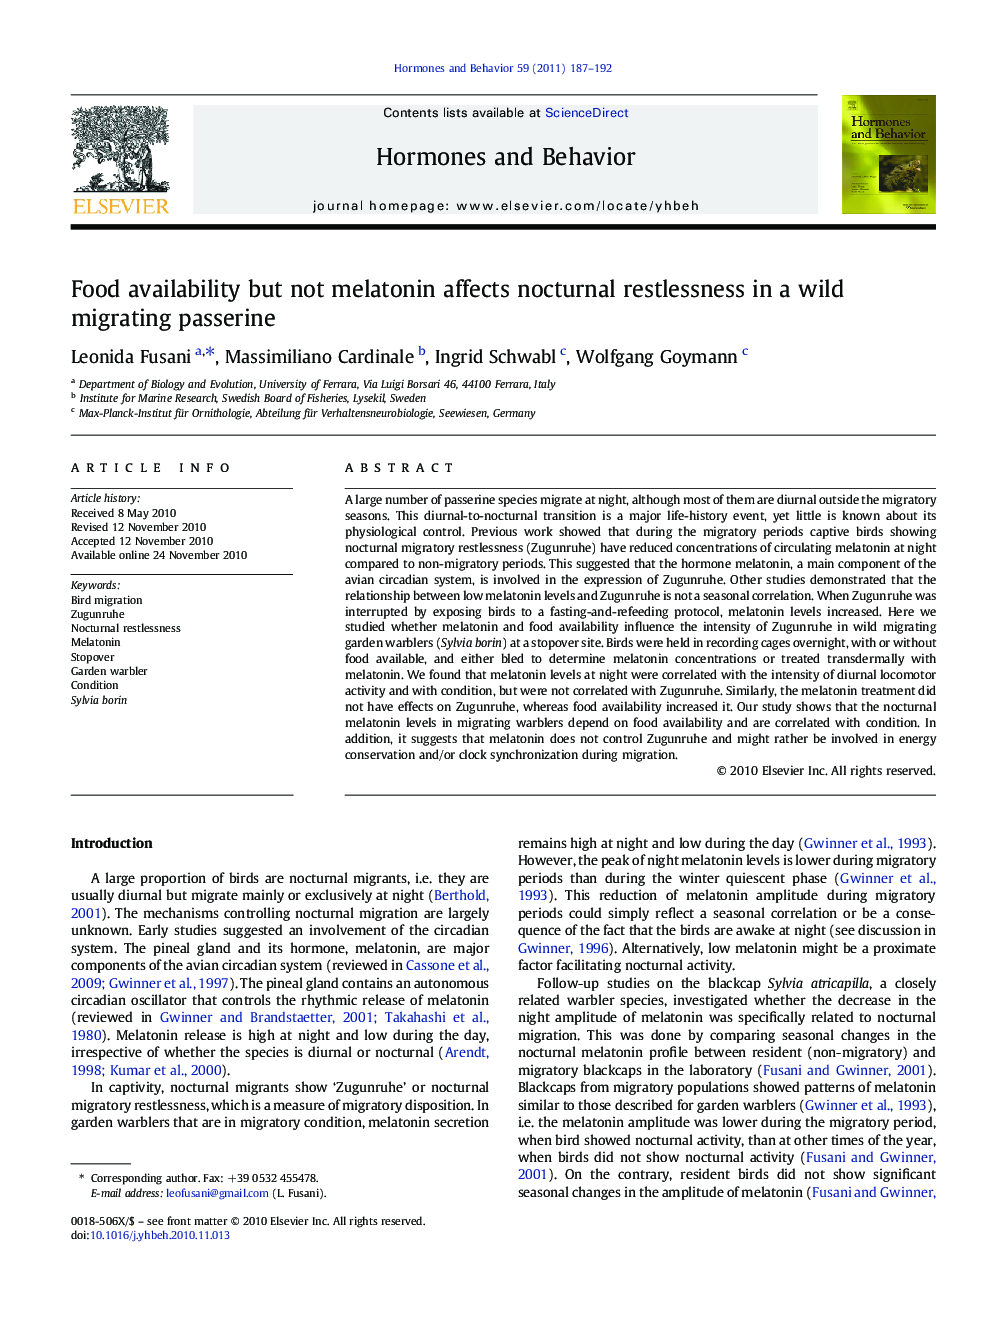 Food availability but not melatonin affects nocturnal restlessness in a wild migrating passerine